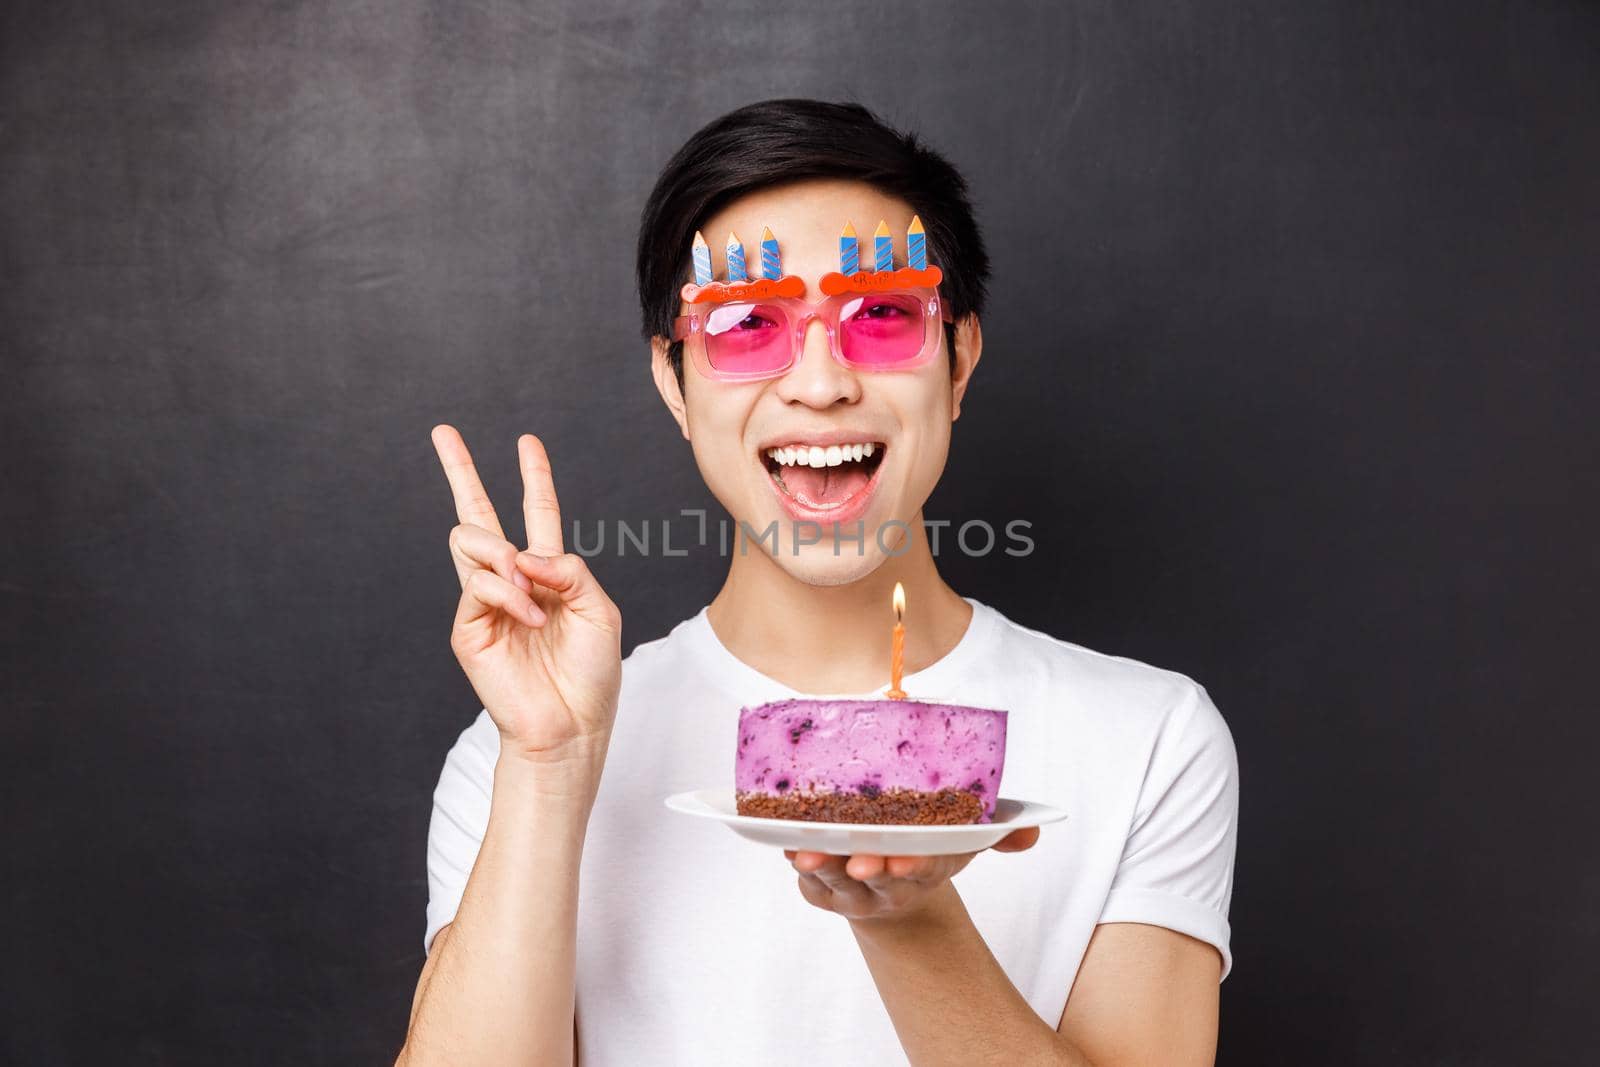 Celebration, holiday and birthday concept. Close-up portrait of joyful funny asian man having fun, enjoying b-day party, show peace sign smiling and hold cake with lit candle, make wish.